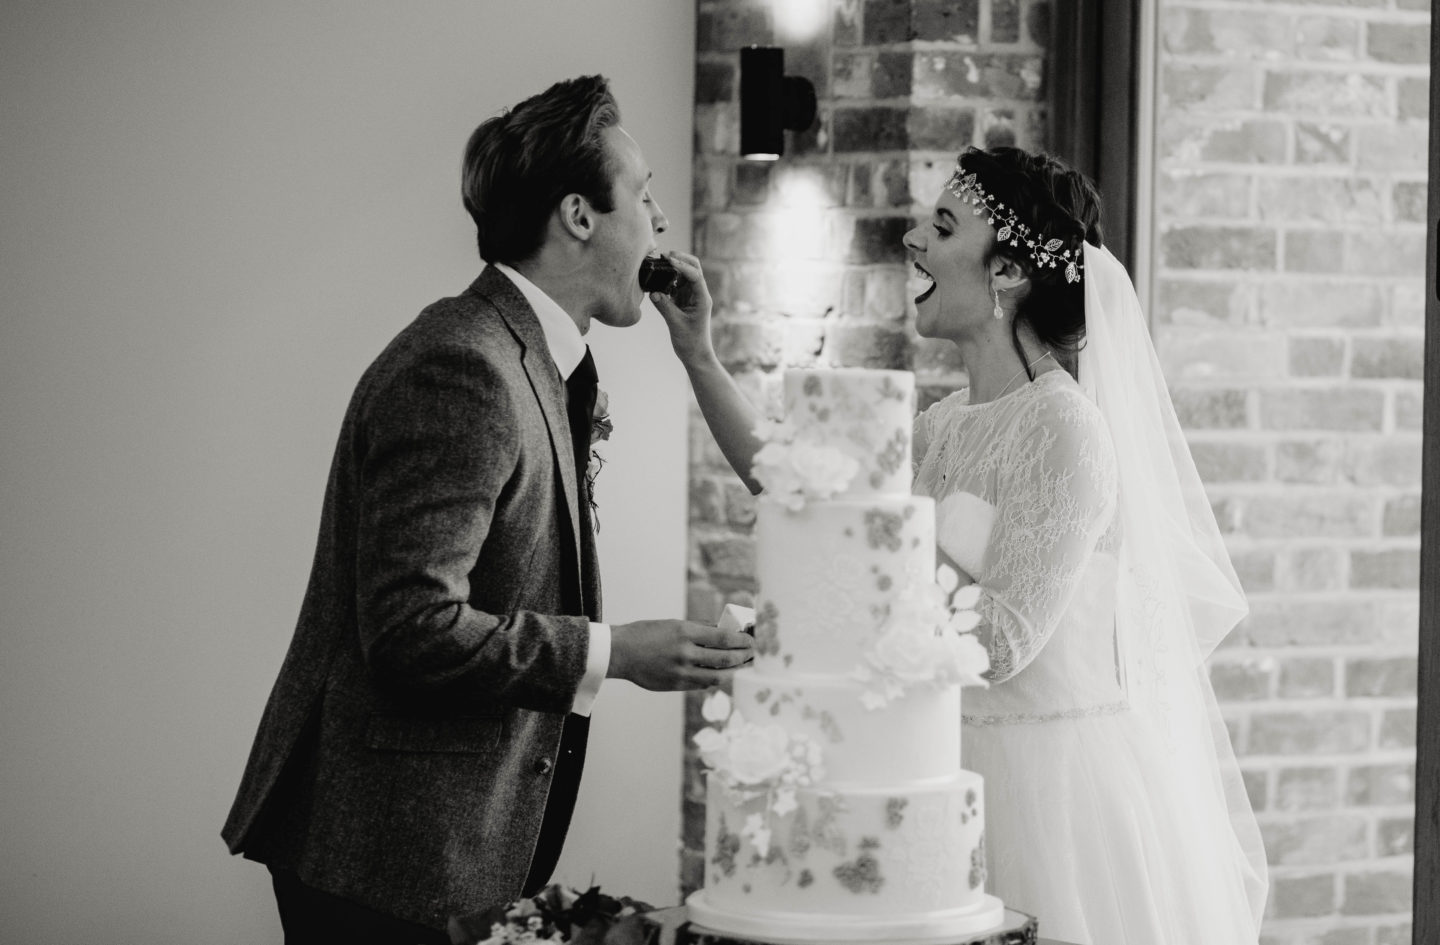 Romeo and Juliet Inspired Wedding With Vintage Charm At Apton Hall, Essex